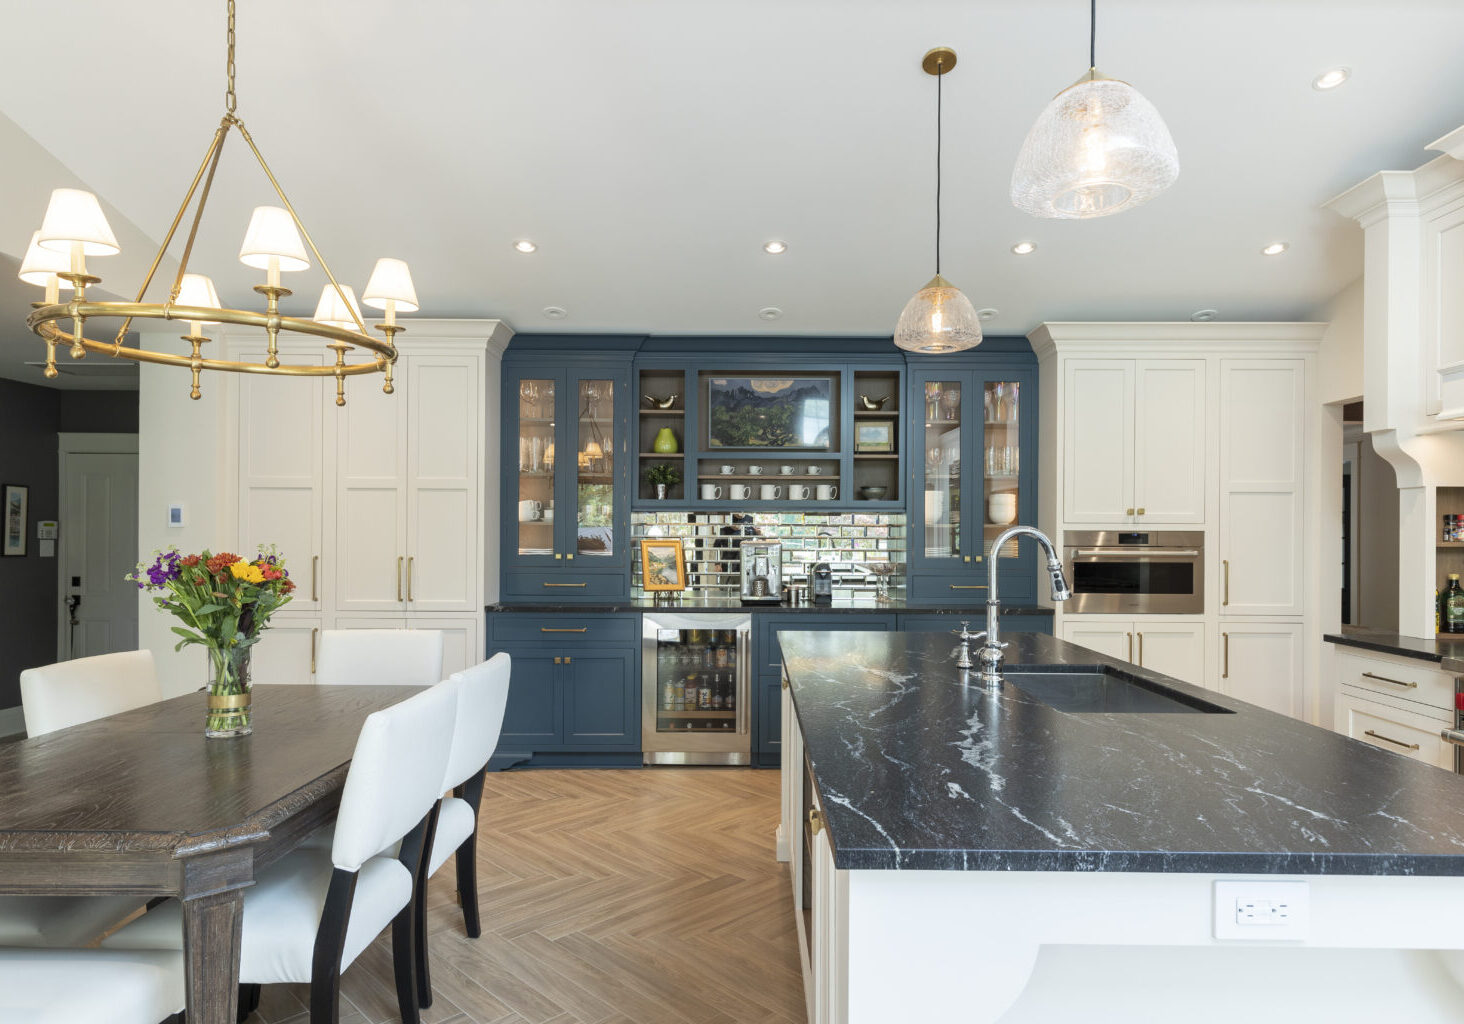 Residential kitchen showcasing dark countertops, and contrasting blue and white custom cabinetry, expertly designed and executed by R.E. McNamara Inc.